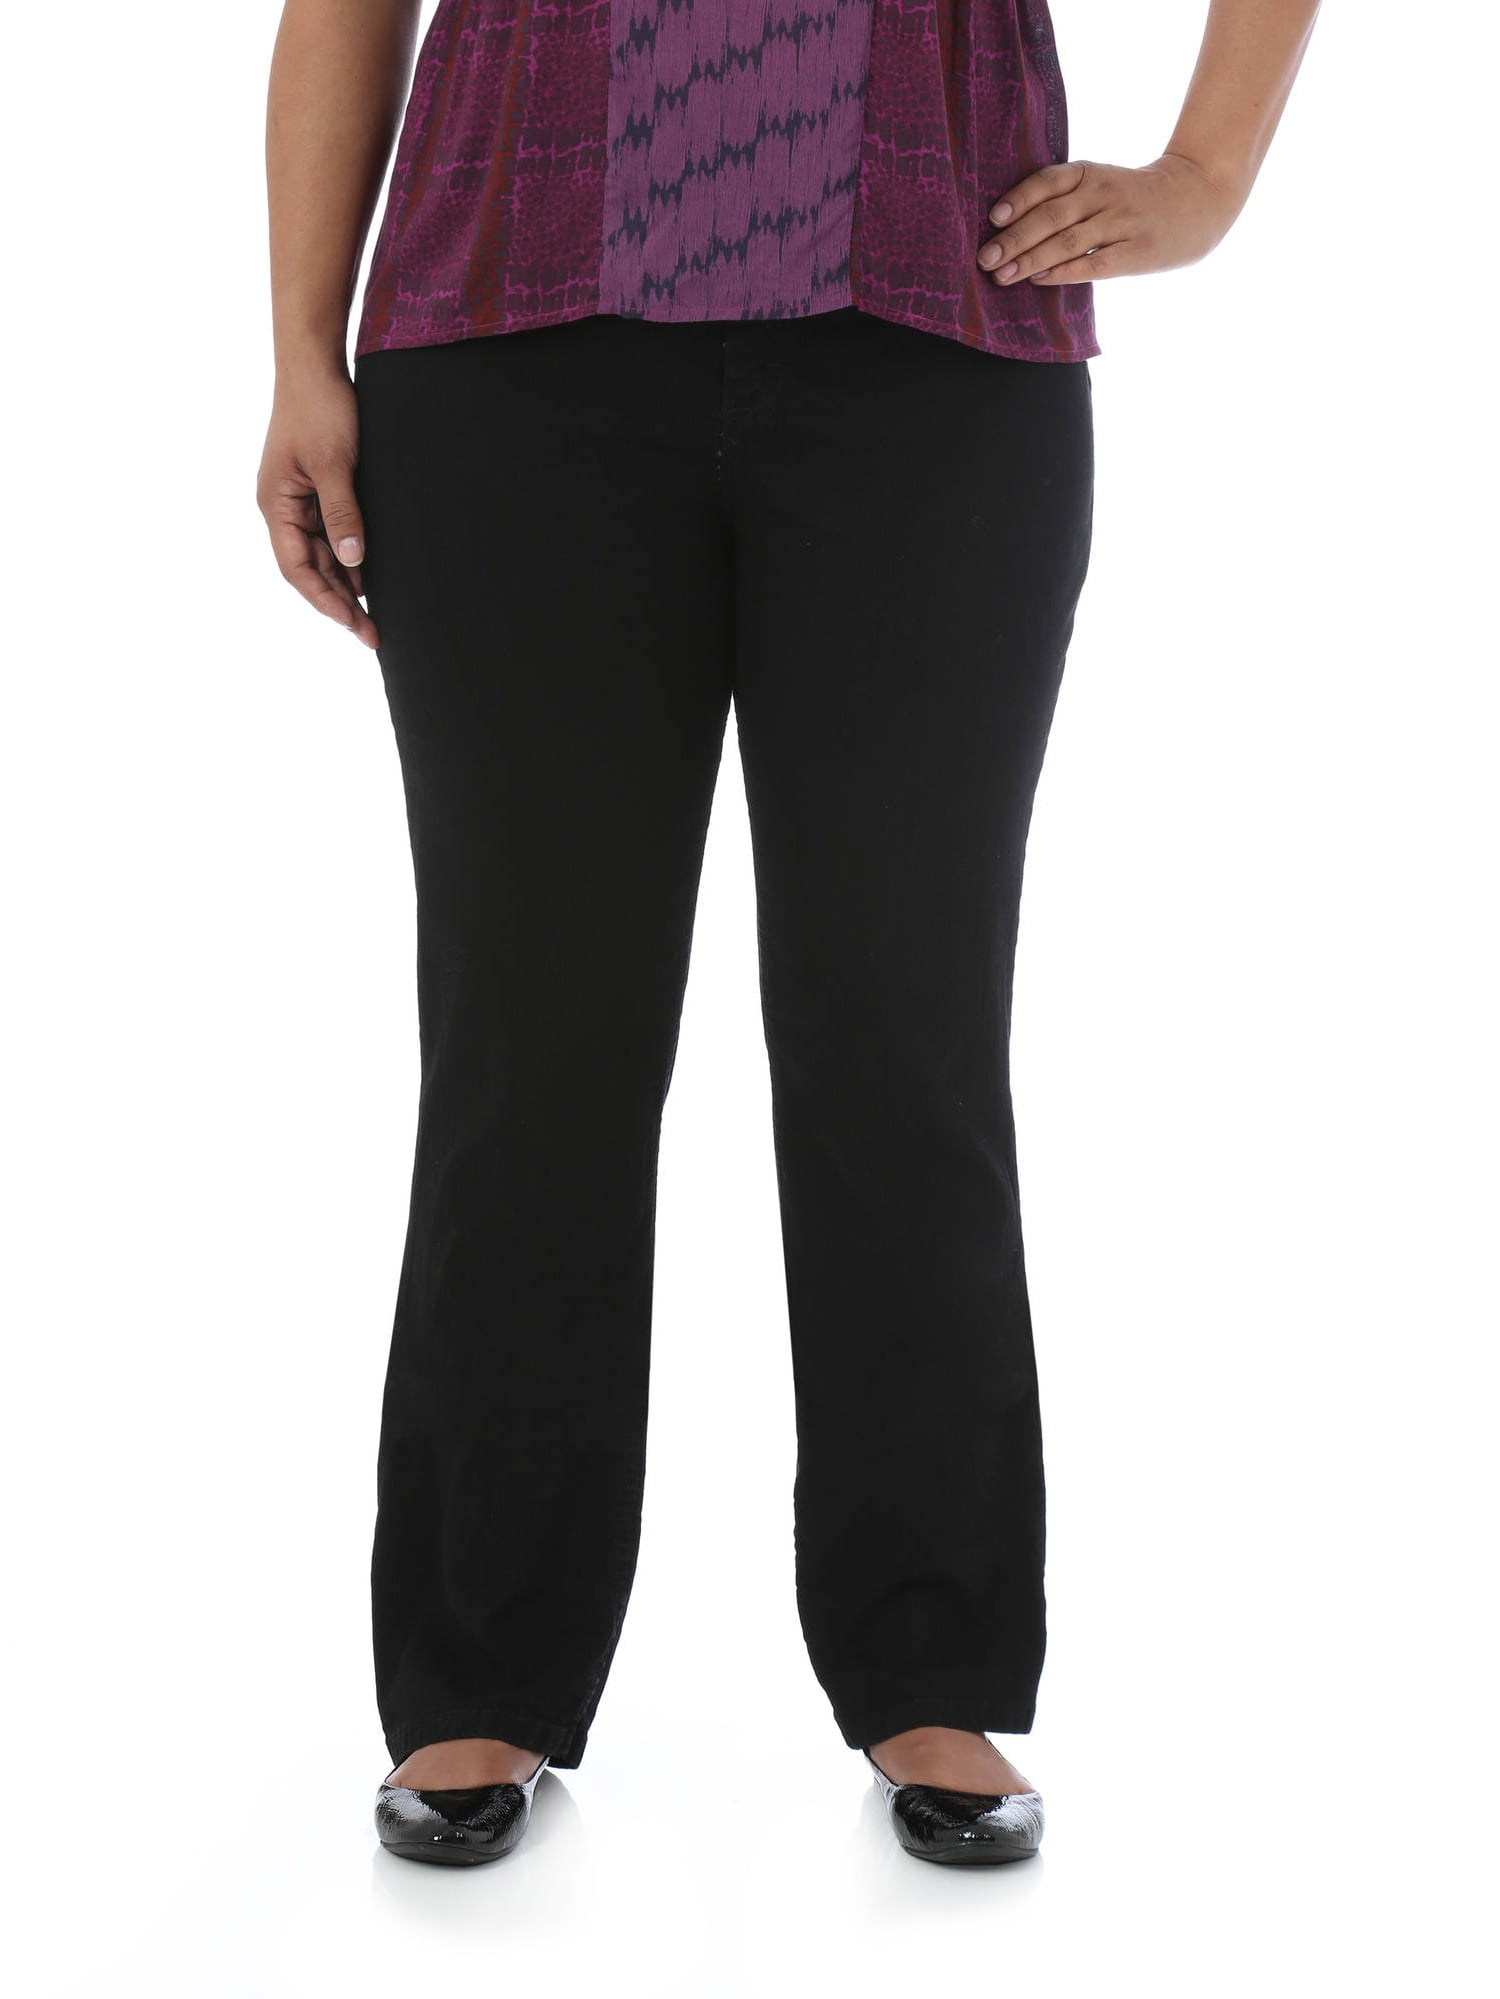 lee comfort waistband jeans plus size